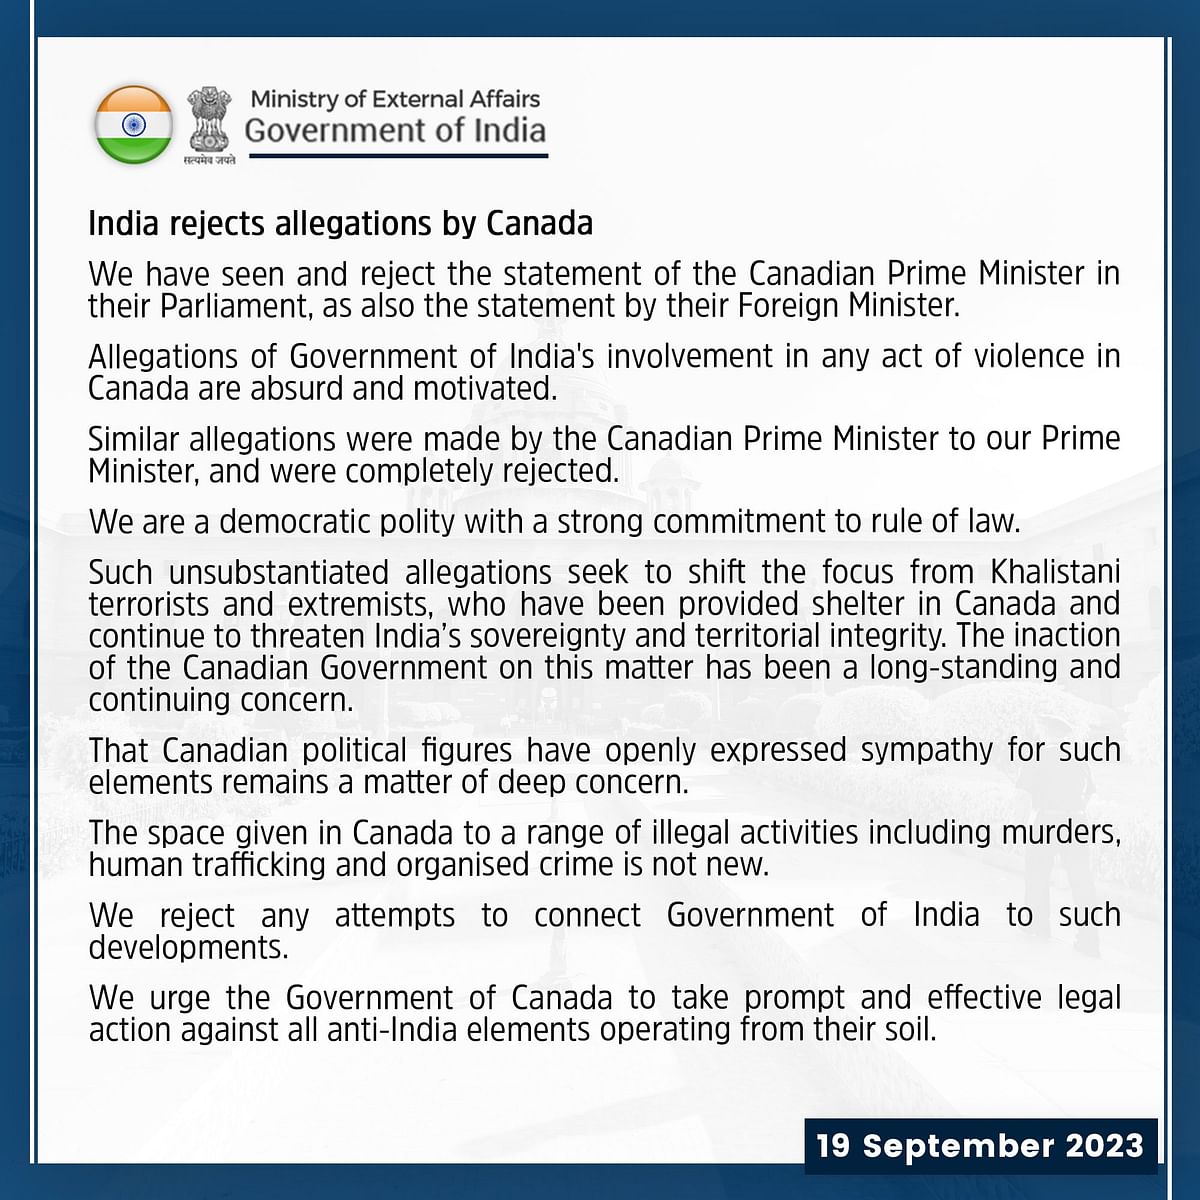 Canada's serious allegations. India's retort. Top diplomats expelled. Here's a quick timeline of the events.